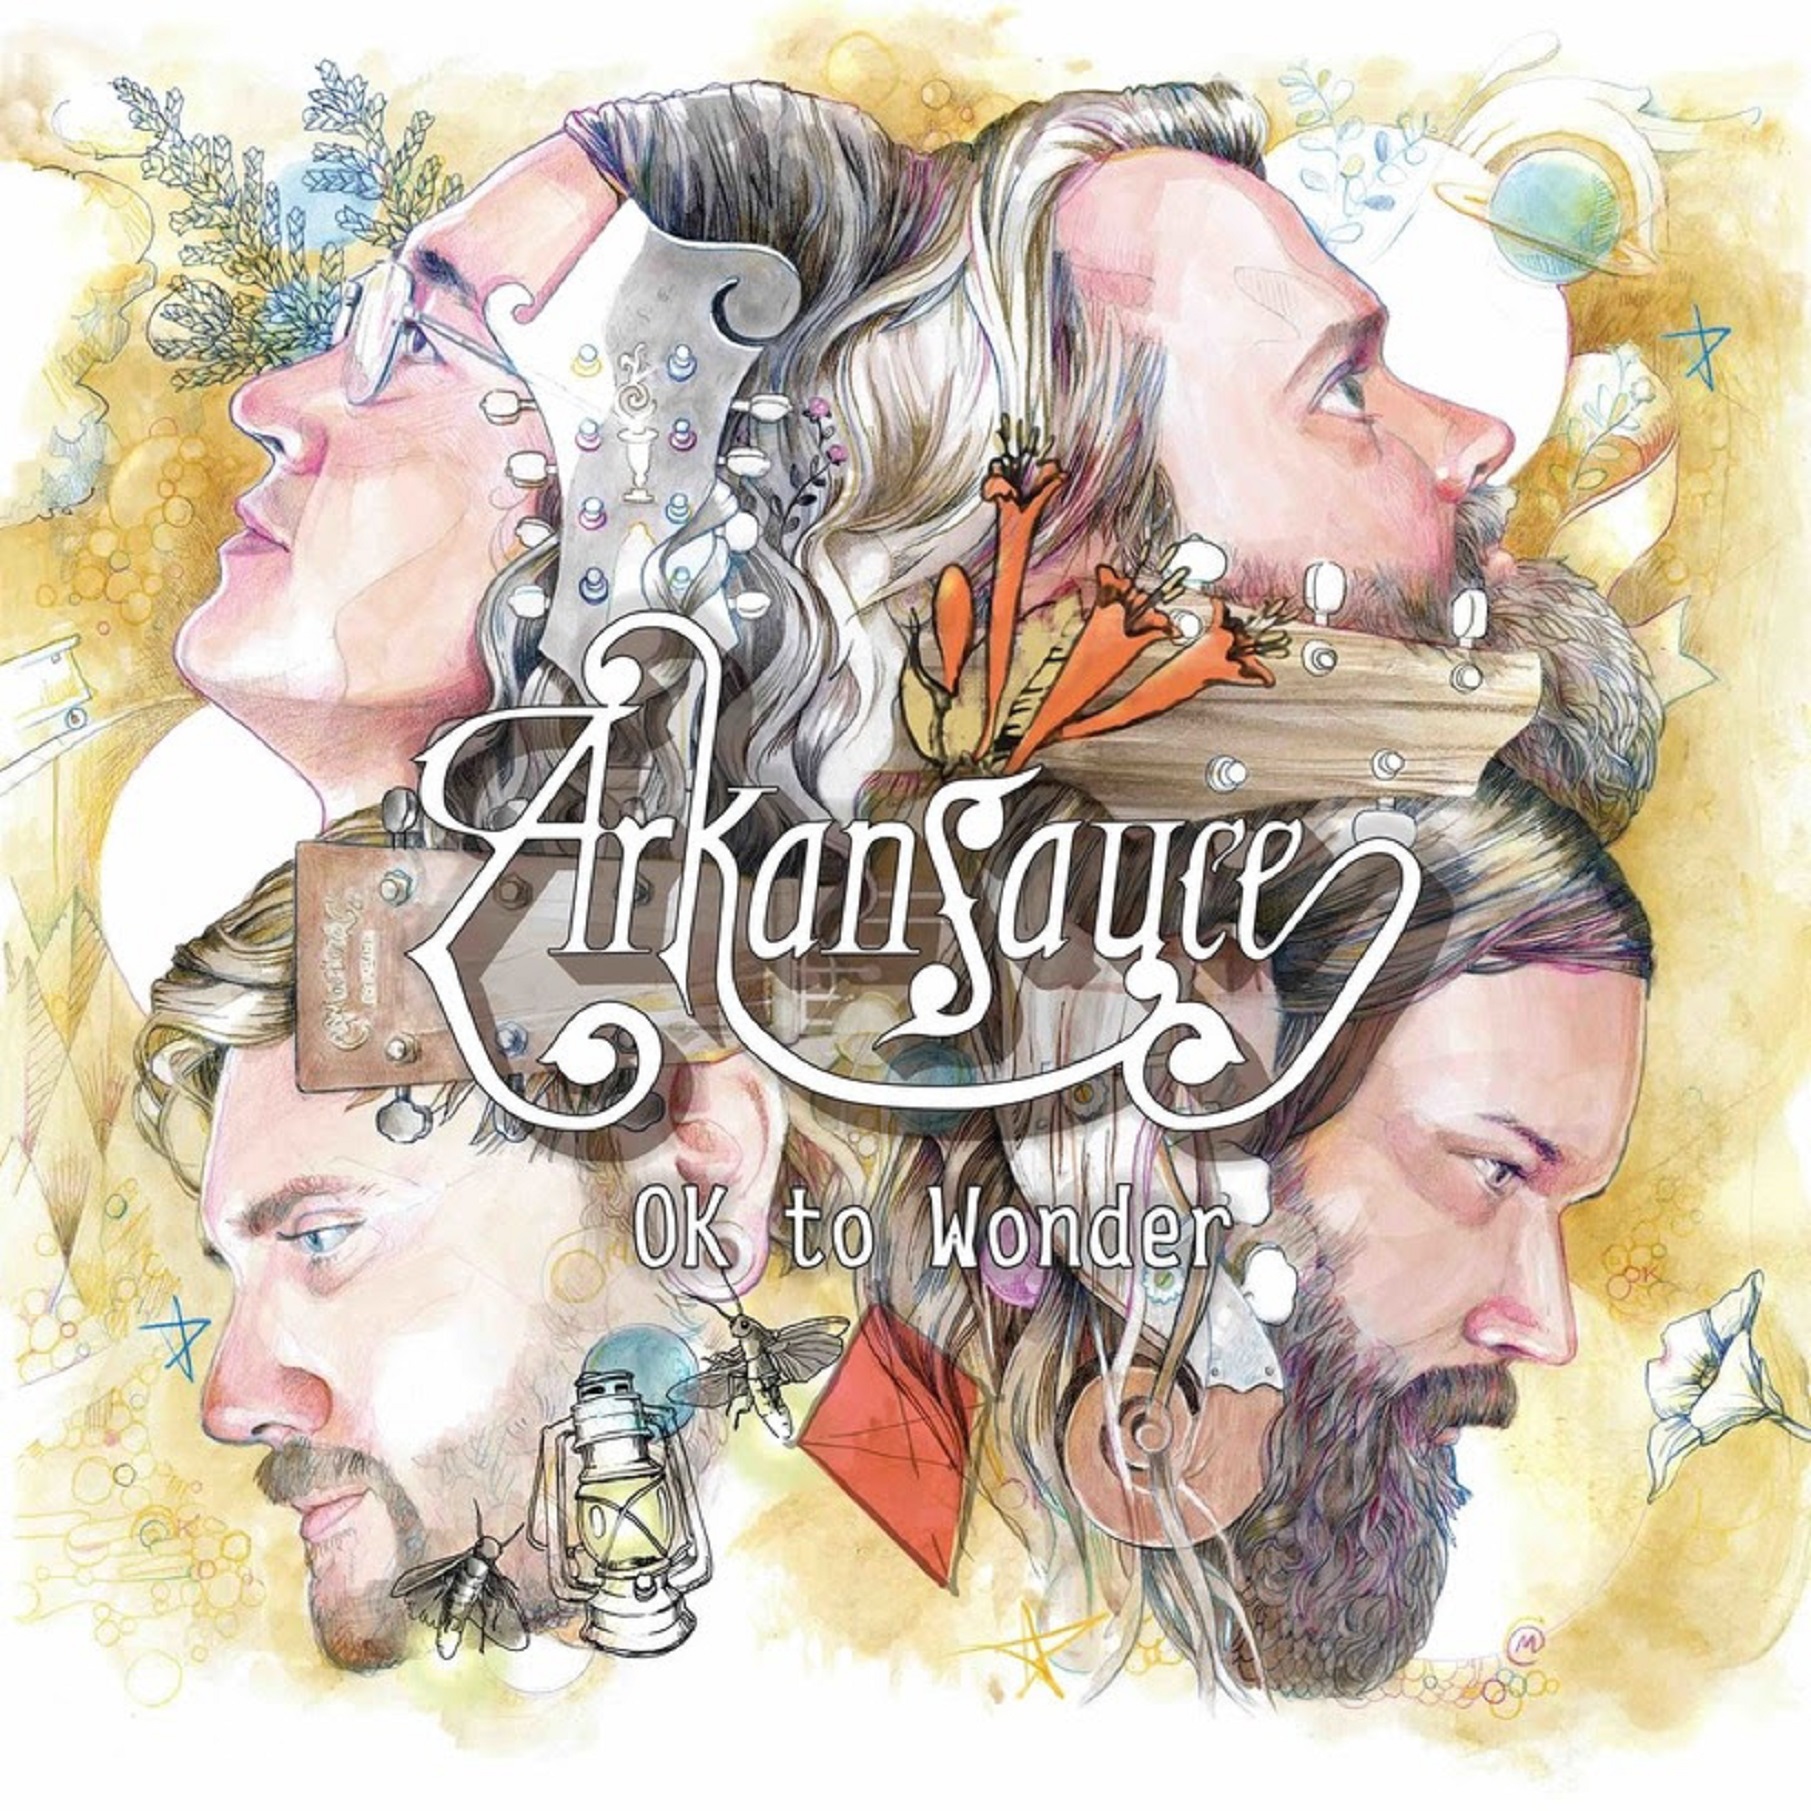 Fiery, Finger-picking String Band, Arkansauce, Releases 1st Single from Upcoming Album—OK to Wonder